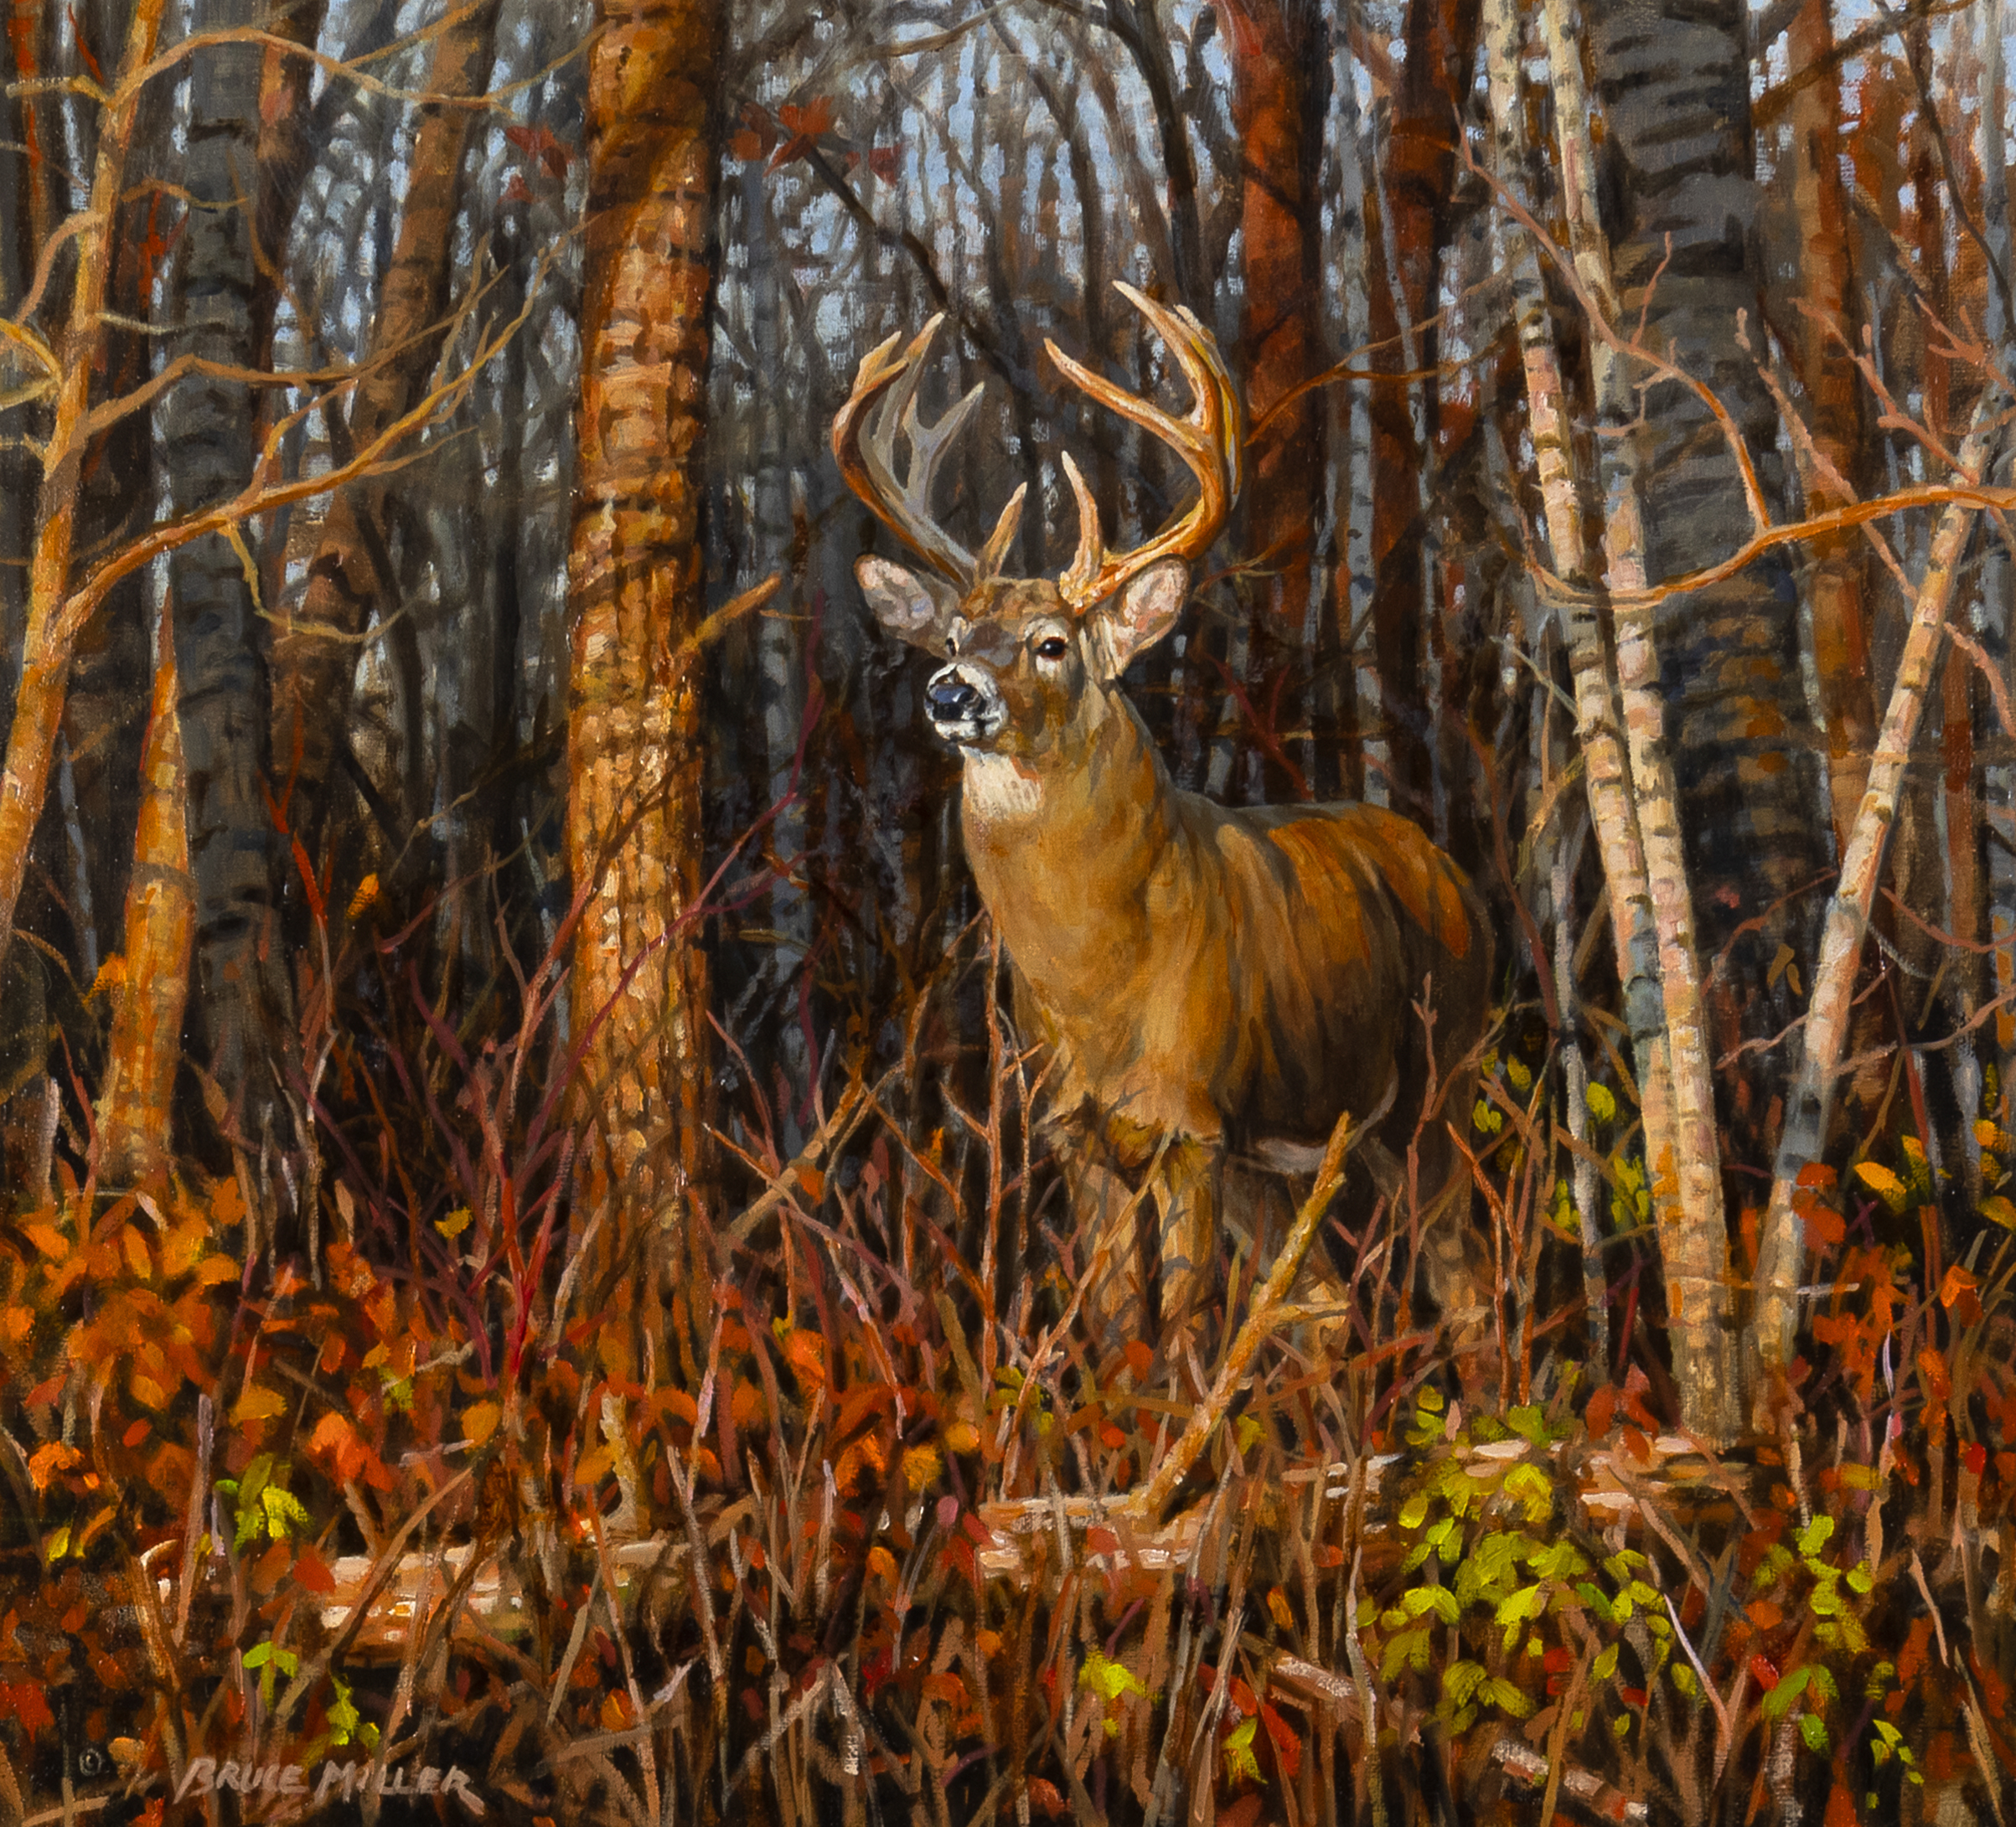 Bruce Miller, Northern Whitetail, oil on canvas